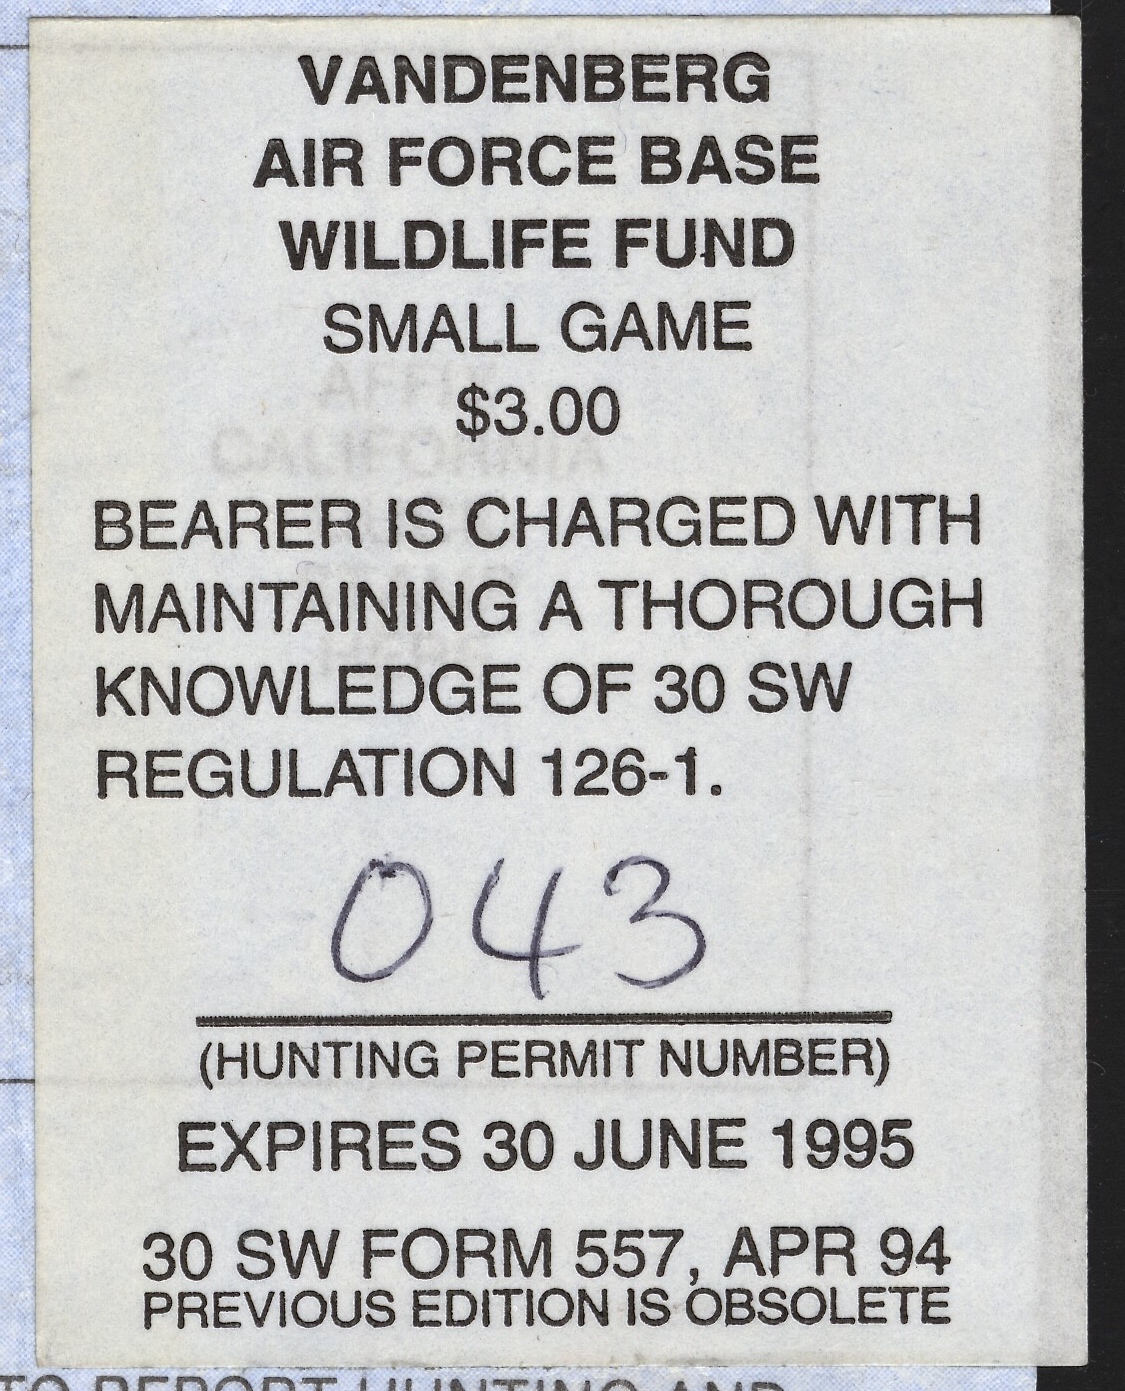 1994-95 VAFB Small Game